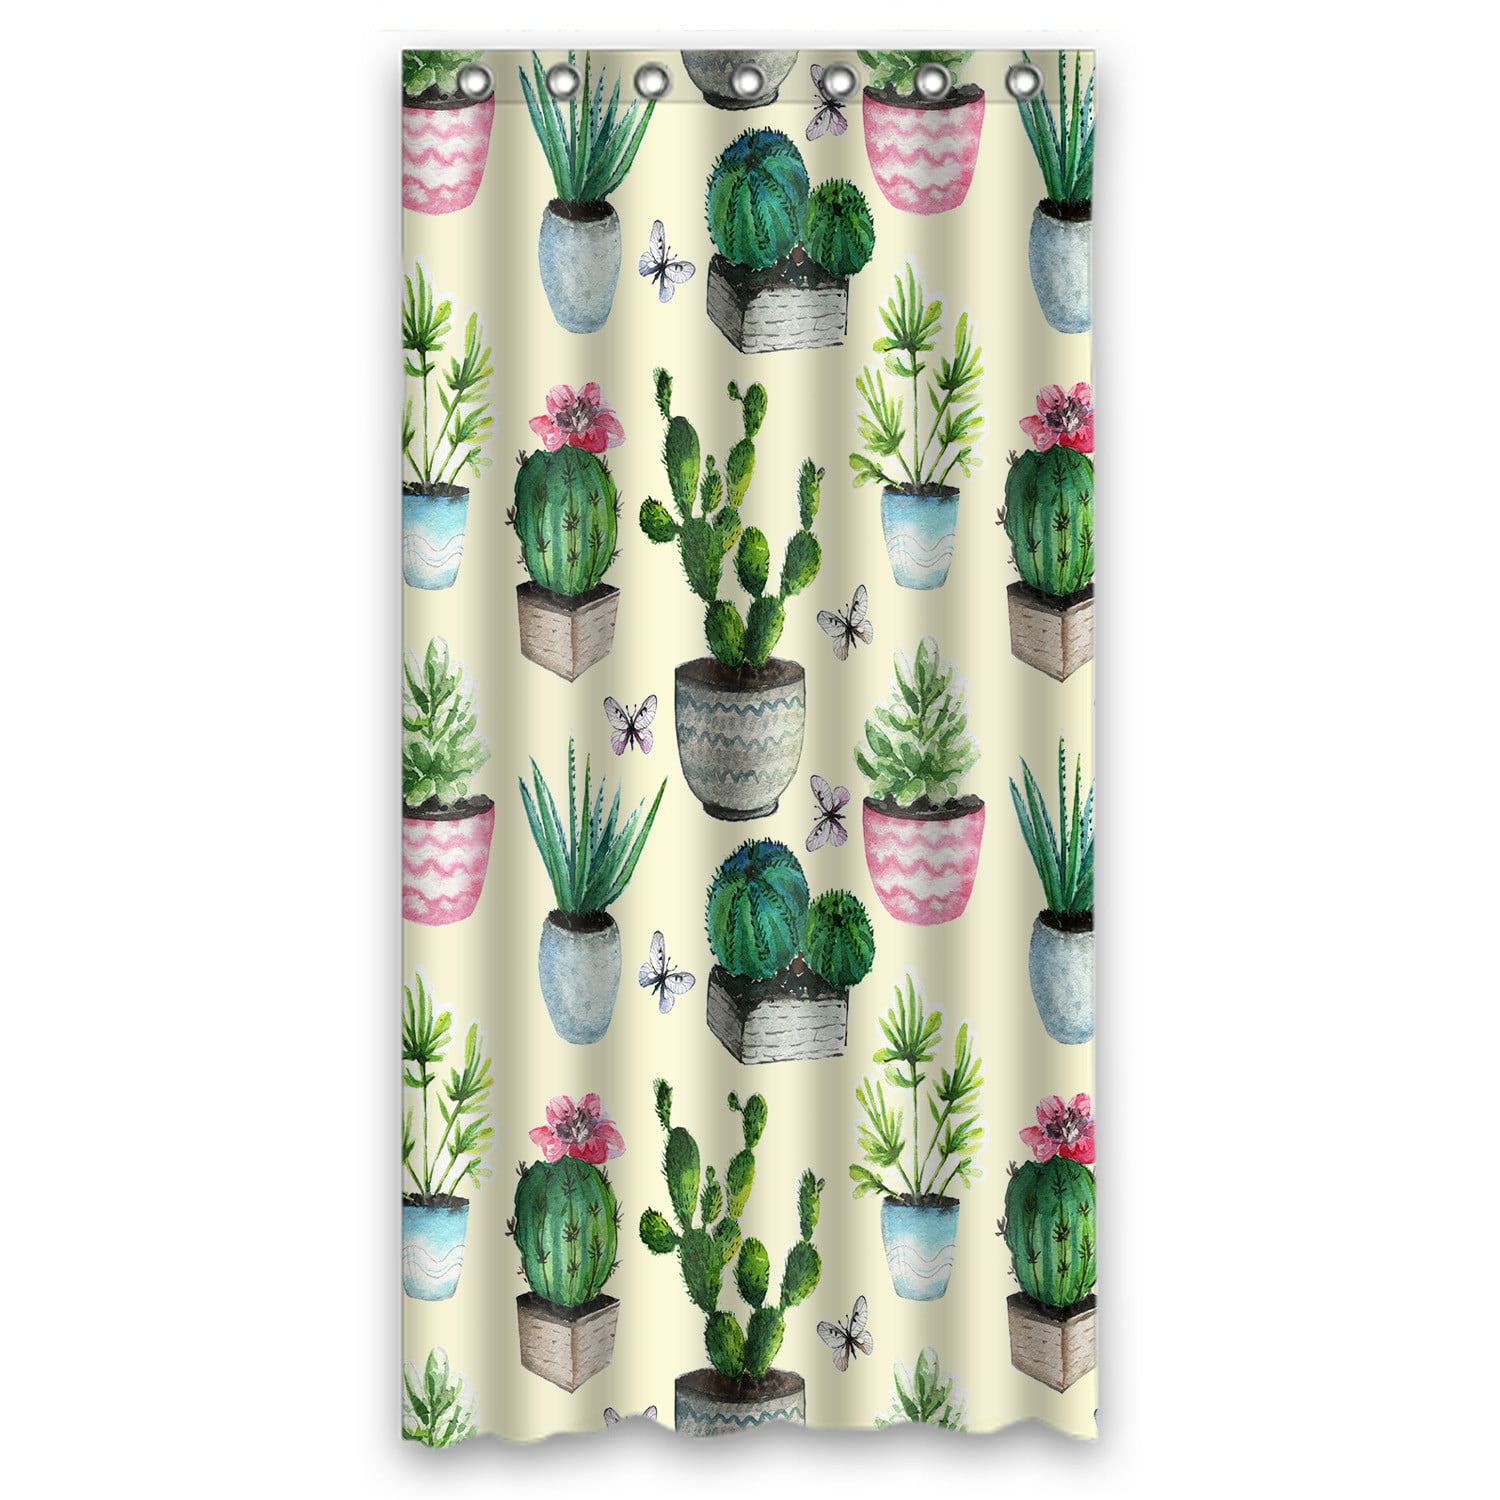 Watercolor House Plants Cactus Agave Urban Jungle Fabric Shower Curtain Set 72" 